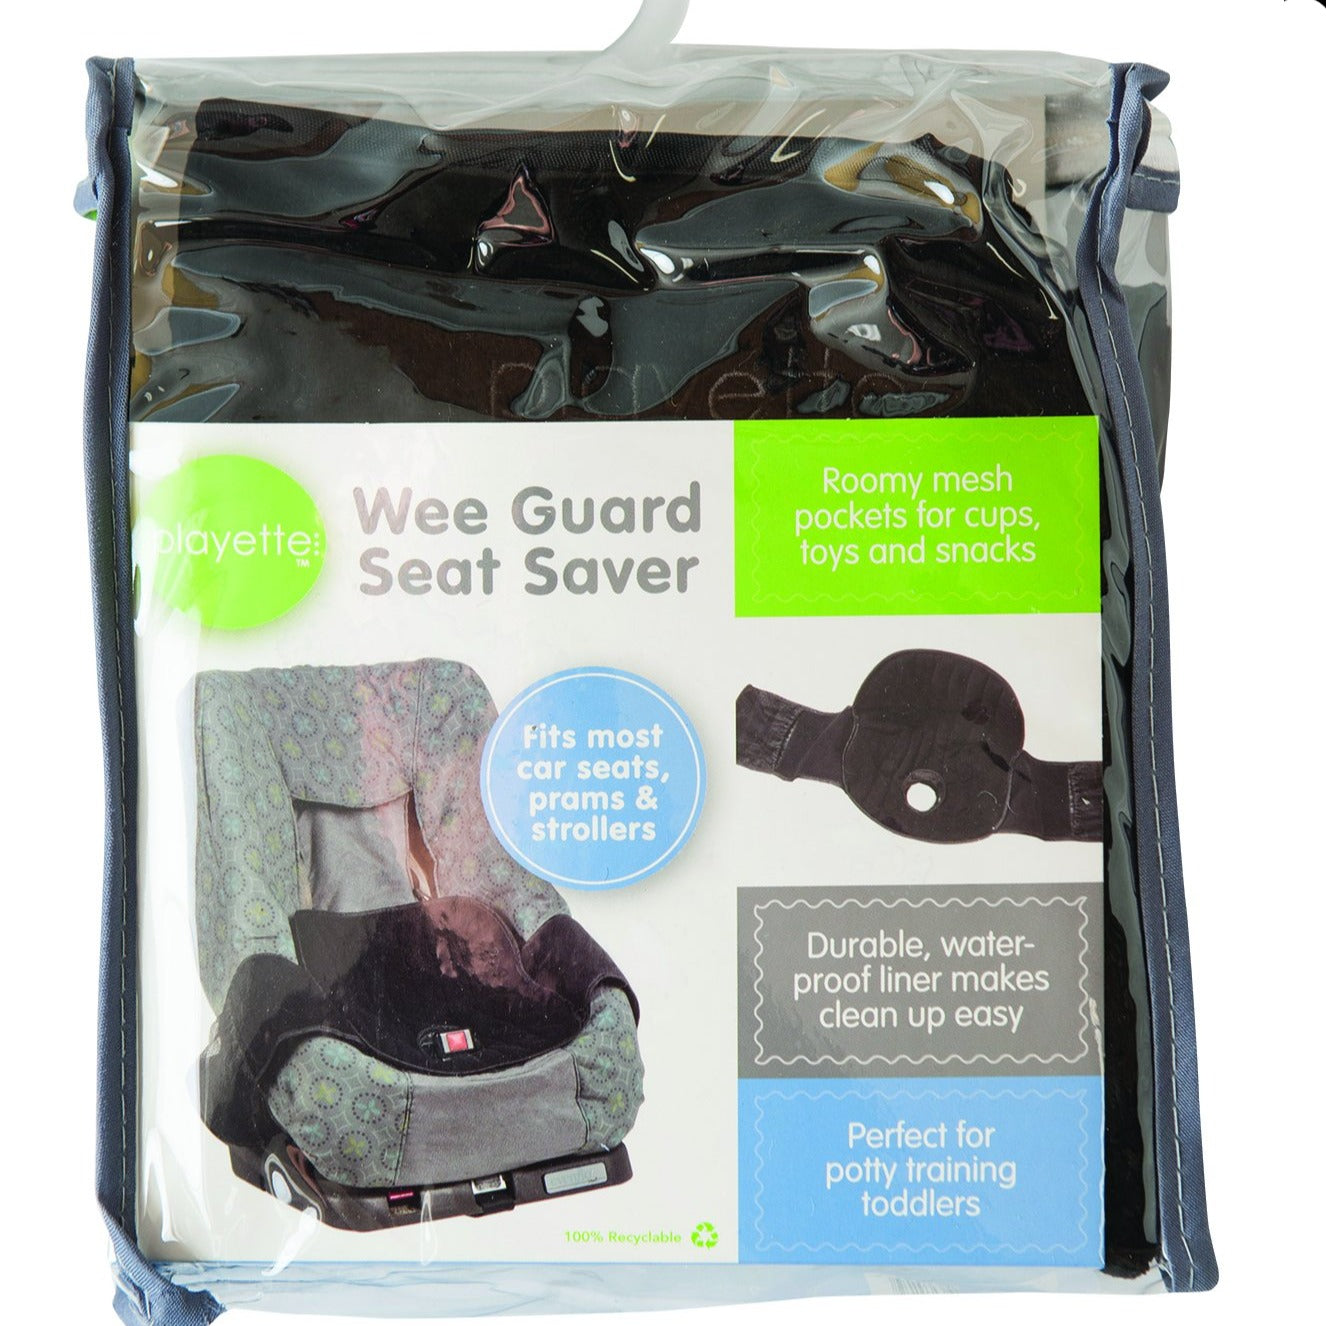 Playette Wee Guard, Waterproof Seat Saver For Messy Nappy Leaks, Spills And Stains